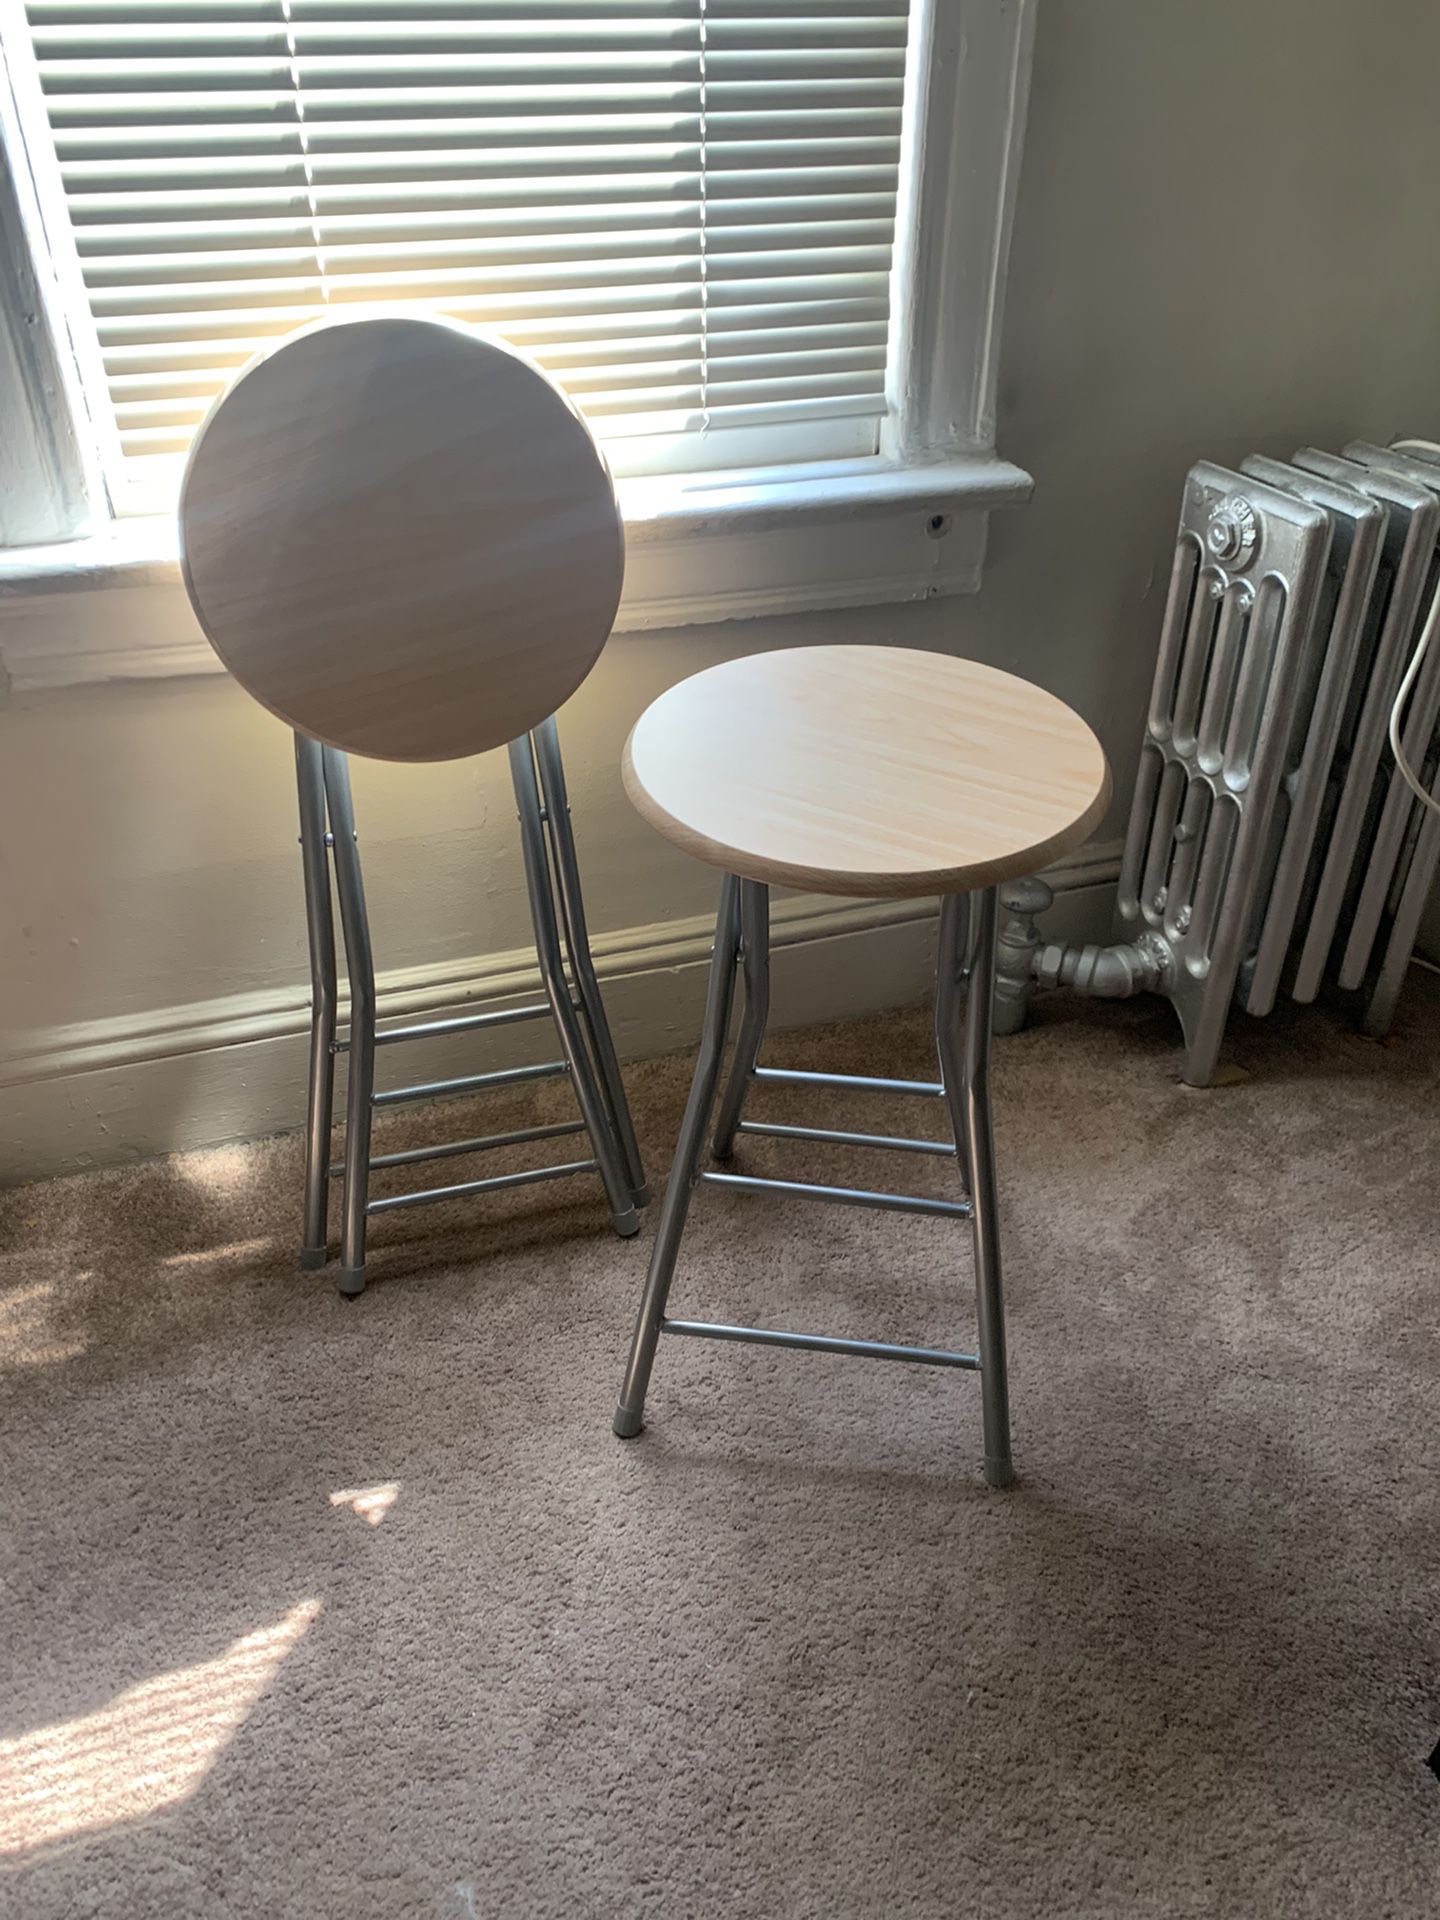  Chair/ Stools  Wooden Top- $15